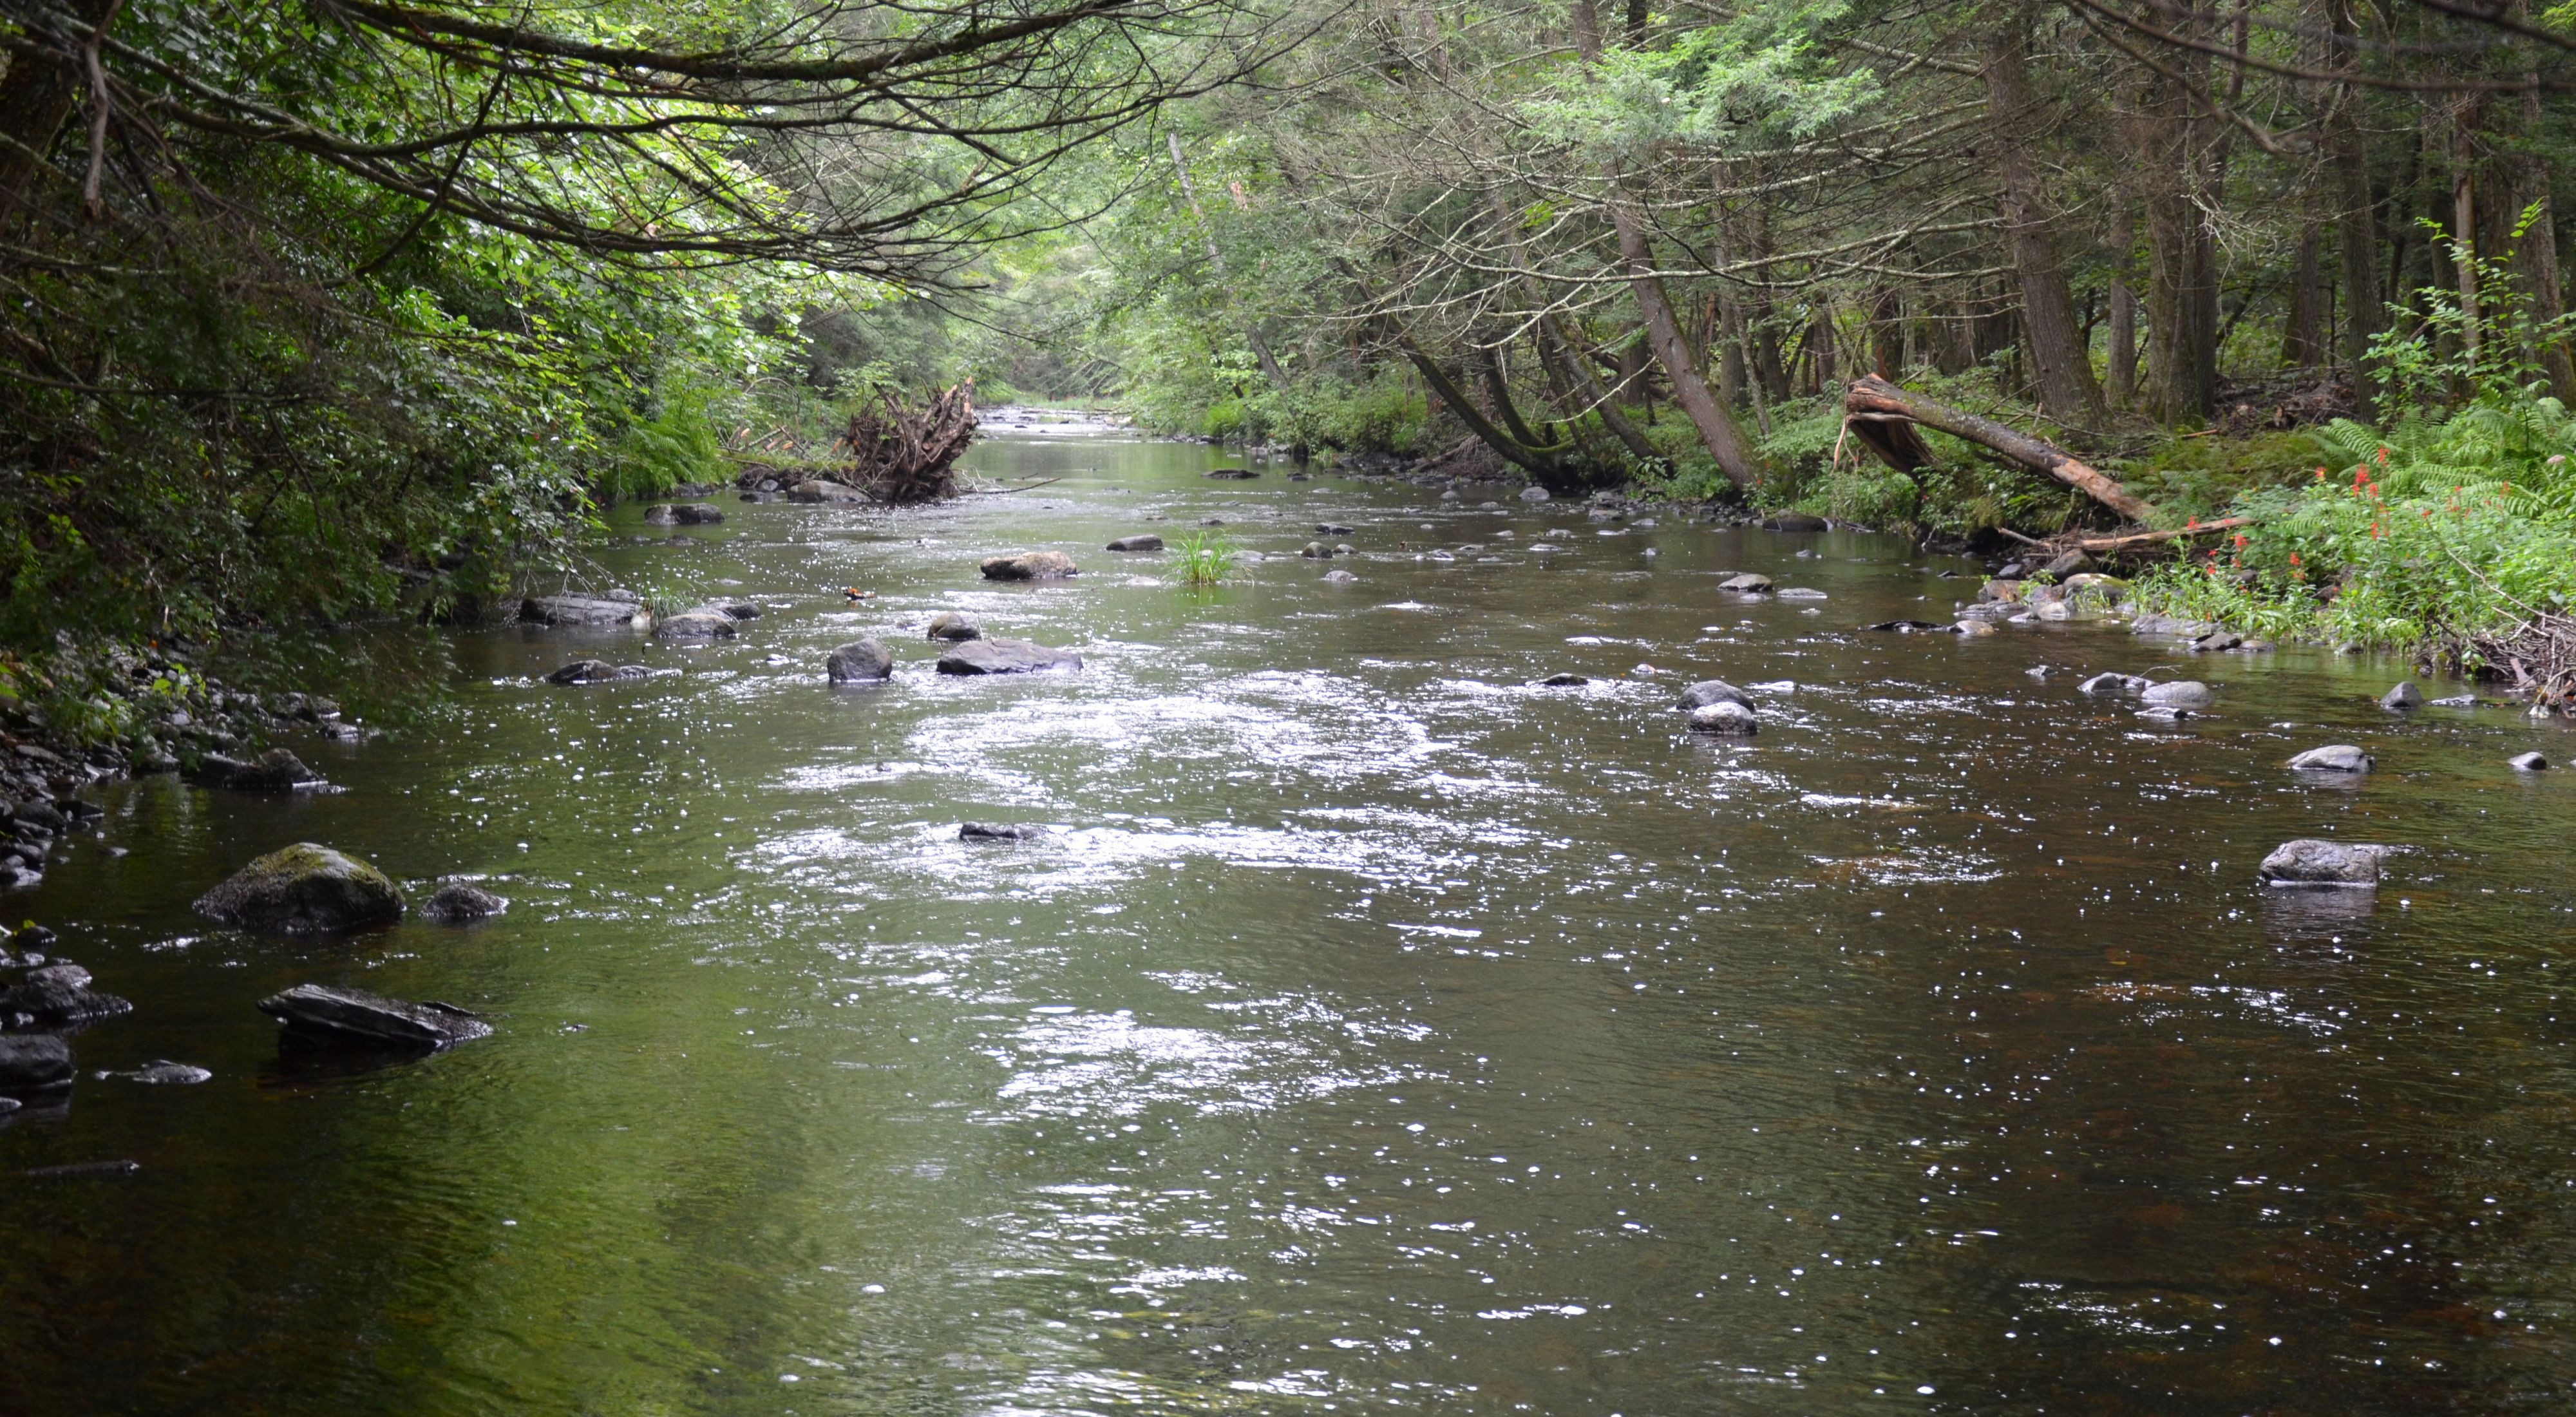 View of river and trees bordering the water of the Eightmile River in Burnham Brook Preserve.